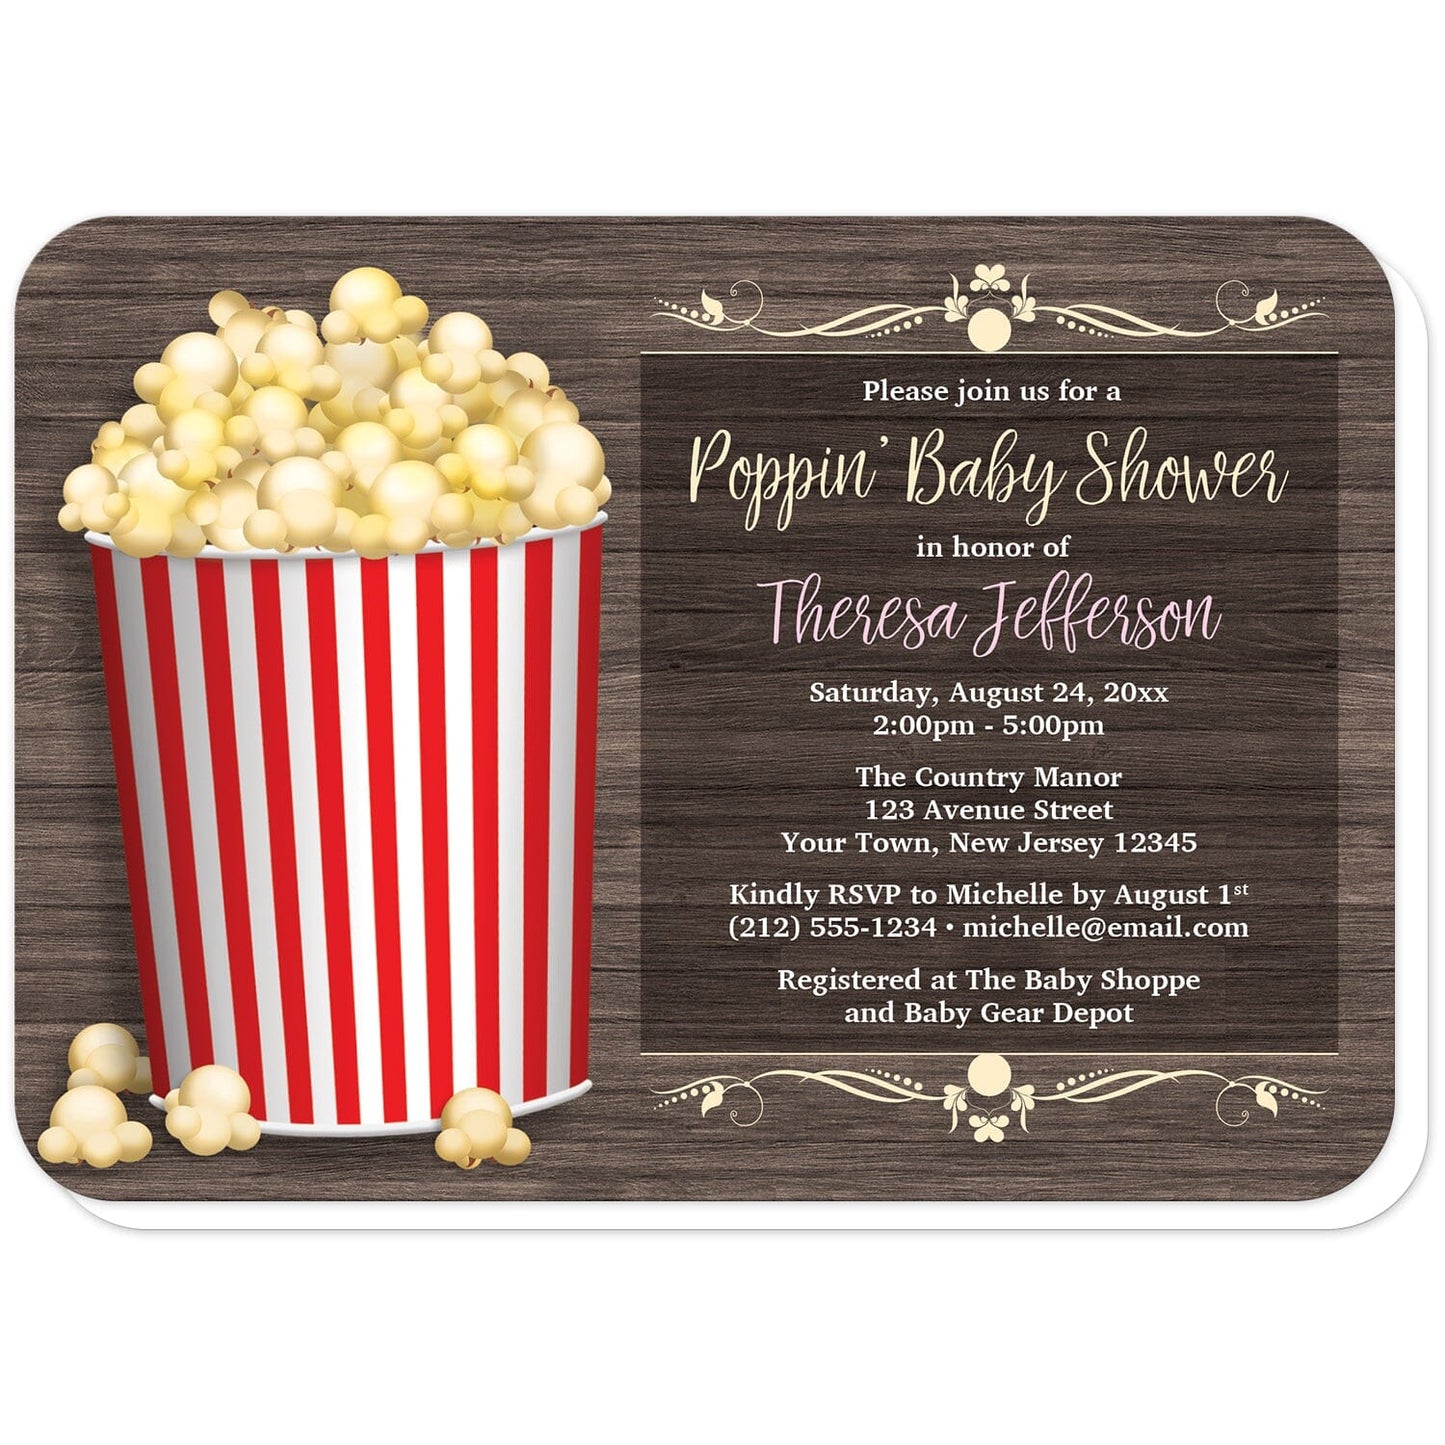 Popcorn Bucket Rustic Wood Baby Shower Invitations (with rounded corners) at Artistically Invited. Unique popcorn bucket rustic wood baby shower invitations with an illustration of a filled red-striped popcorn bucket over a brown wood pattern background. The occasion title reads "Poppin' Baby Shower", but this can be changed if desired. The information you provide for your baby shower will be printed in pink, yellow, and white over a darker screen-like area of the rustic wood background on the right.